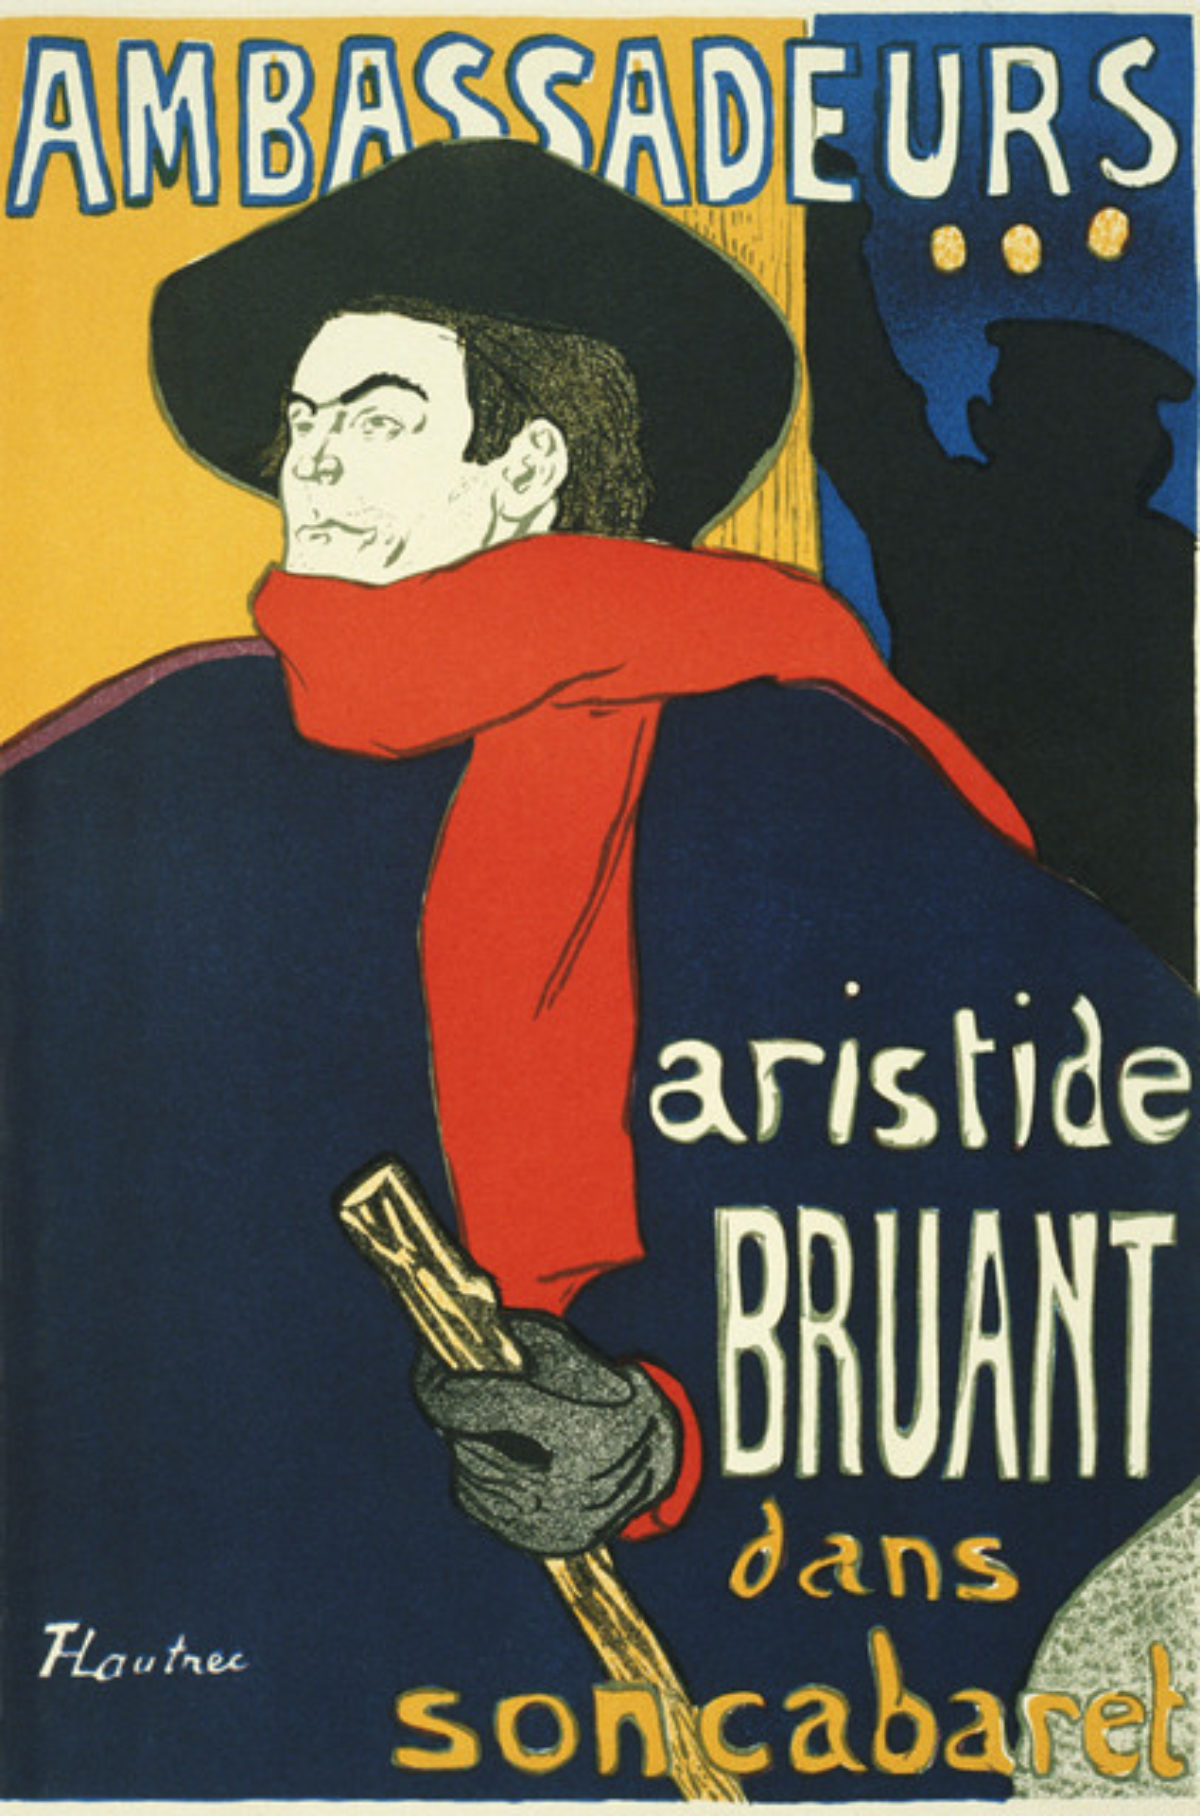 A poster of a person with a black beret and coat holding onto a stick as a shadows figure is behind him.